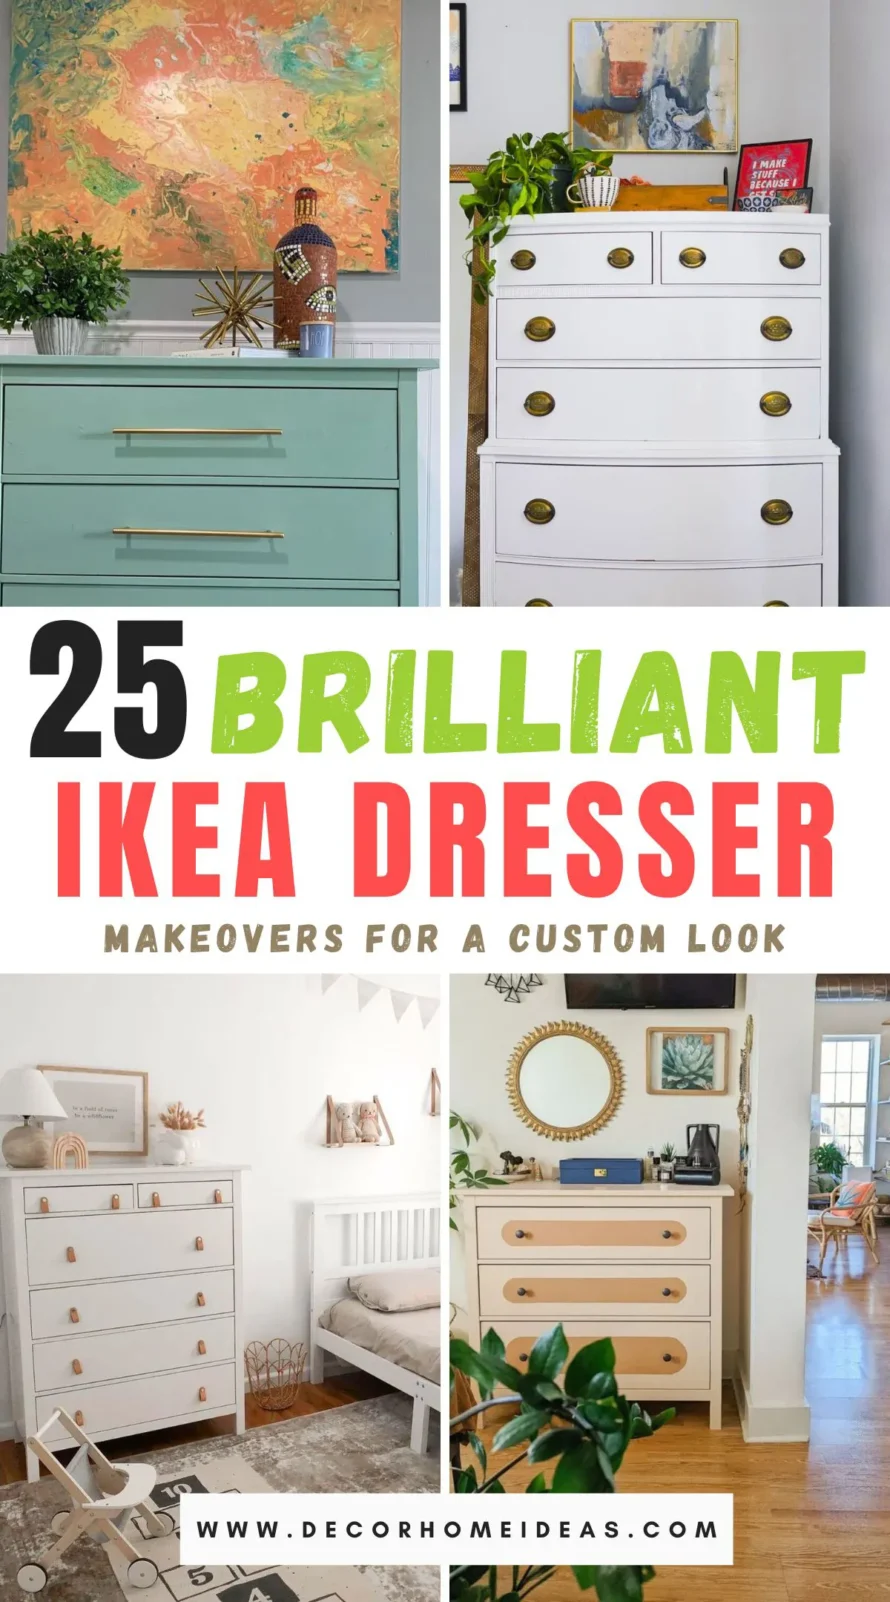 Discover 25 ingenious IKEA dresser hacks that anyone can master, transforming ordinary furniture into extraordinary pieces of functional art. From simple paint jobs to creative hardware swaps, unleash your creativity and elevate your home decor effortlessly.